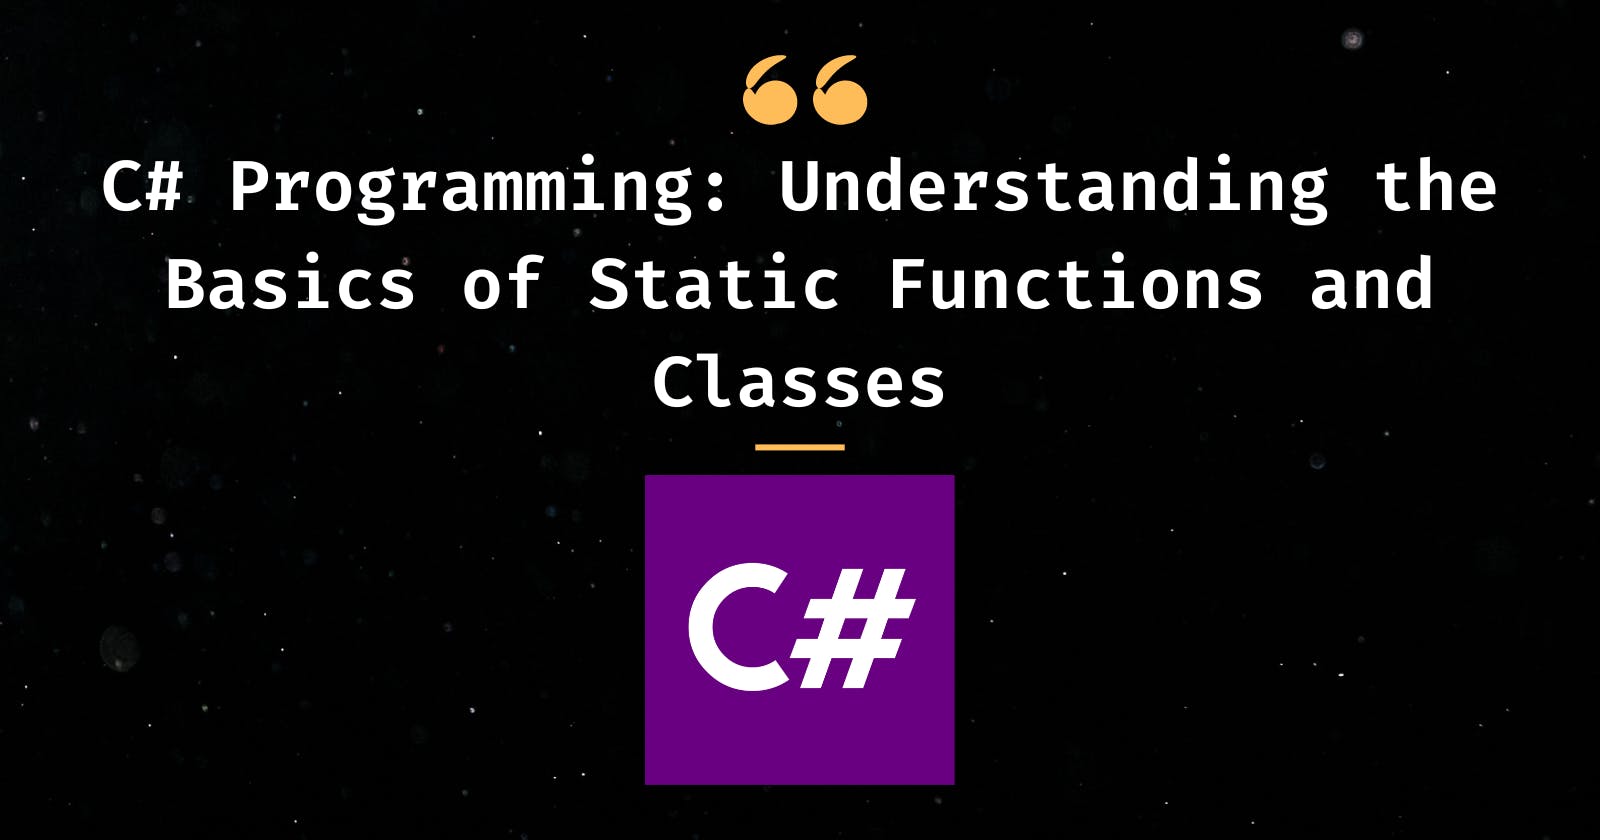 C# Programming: Understanding the Basics of Static Functions and Classes